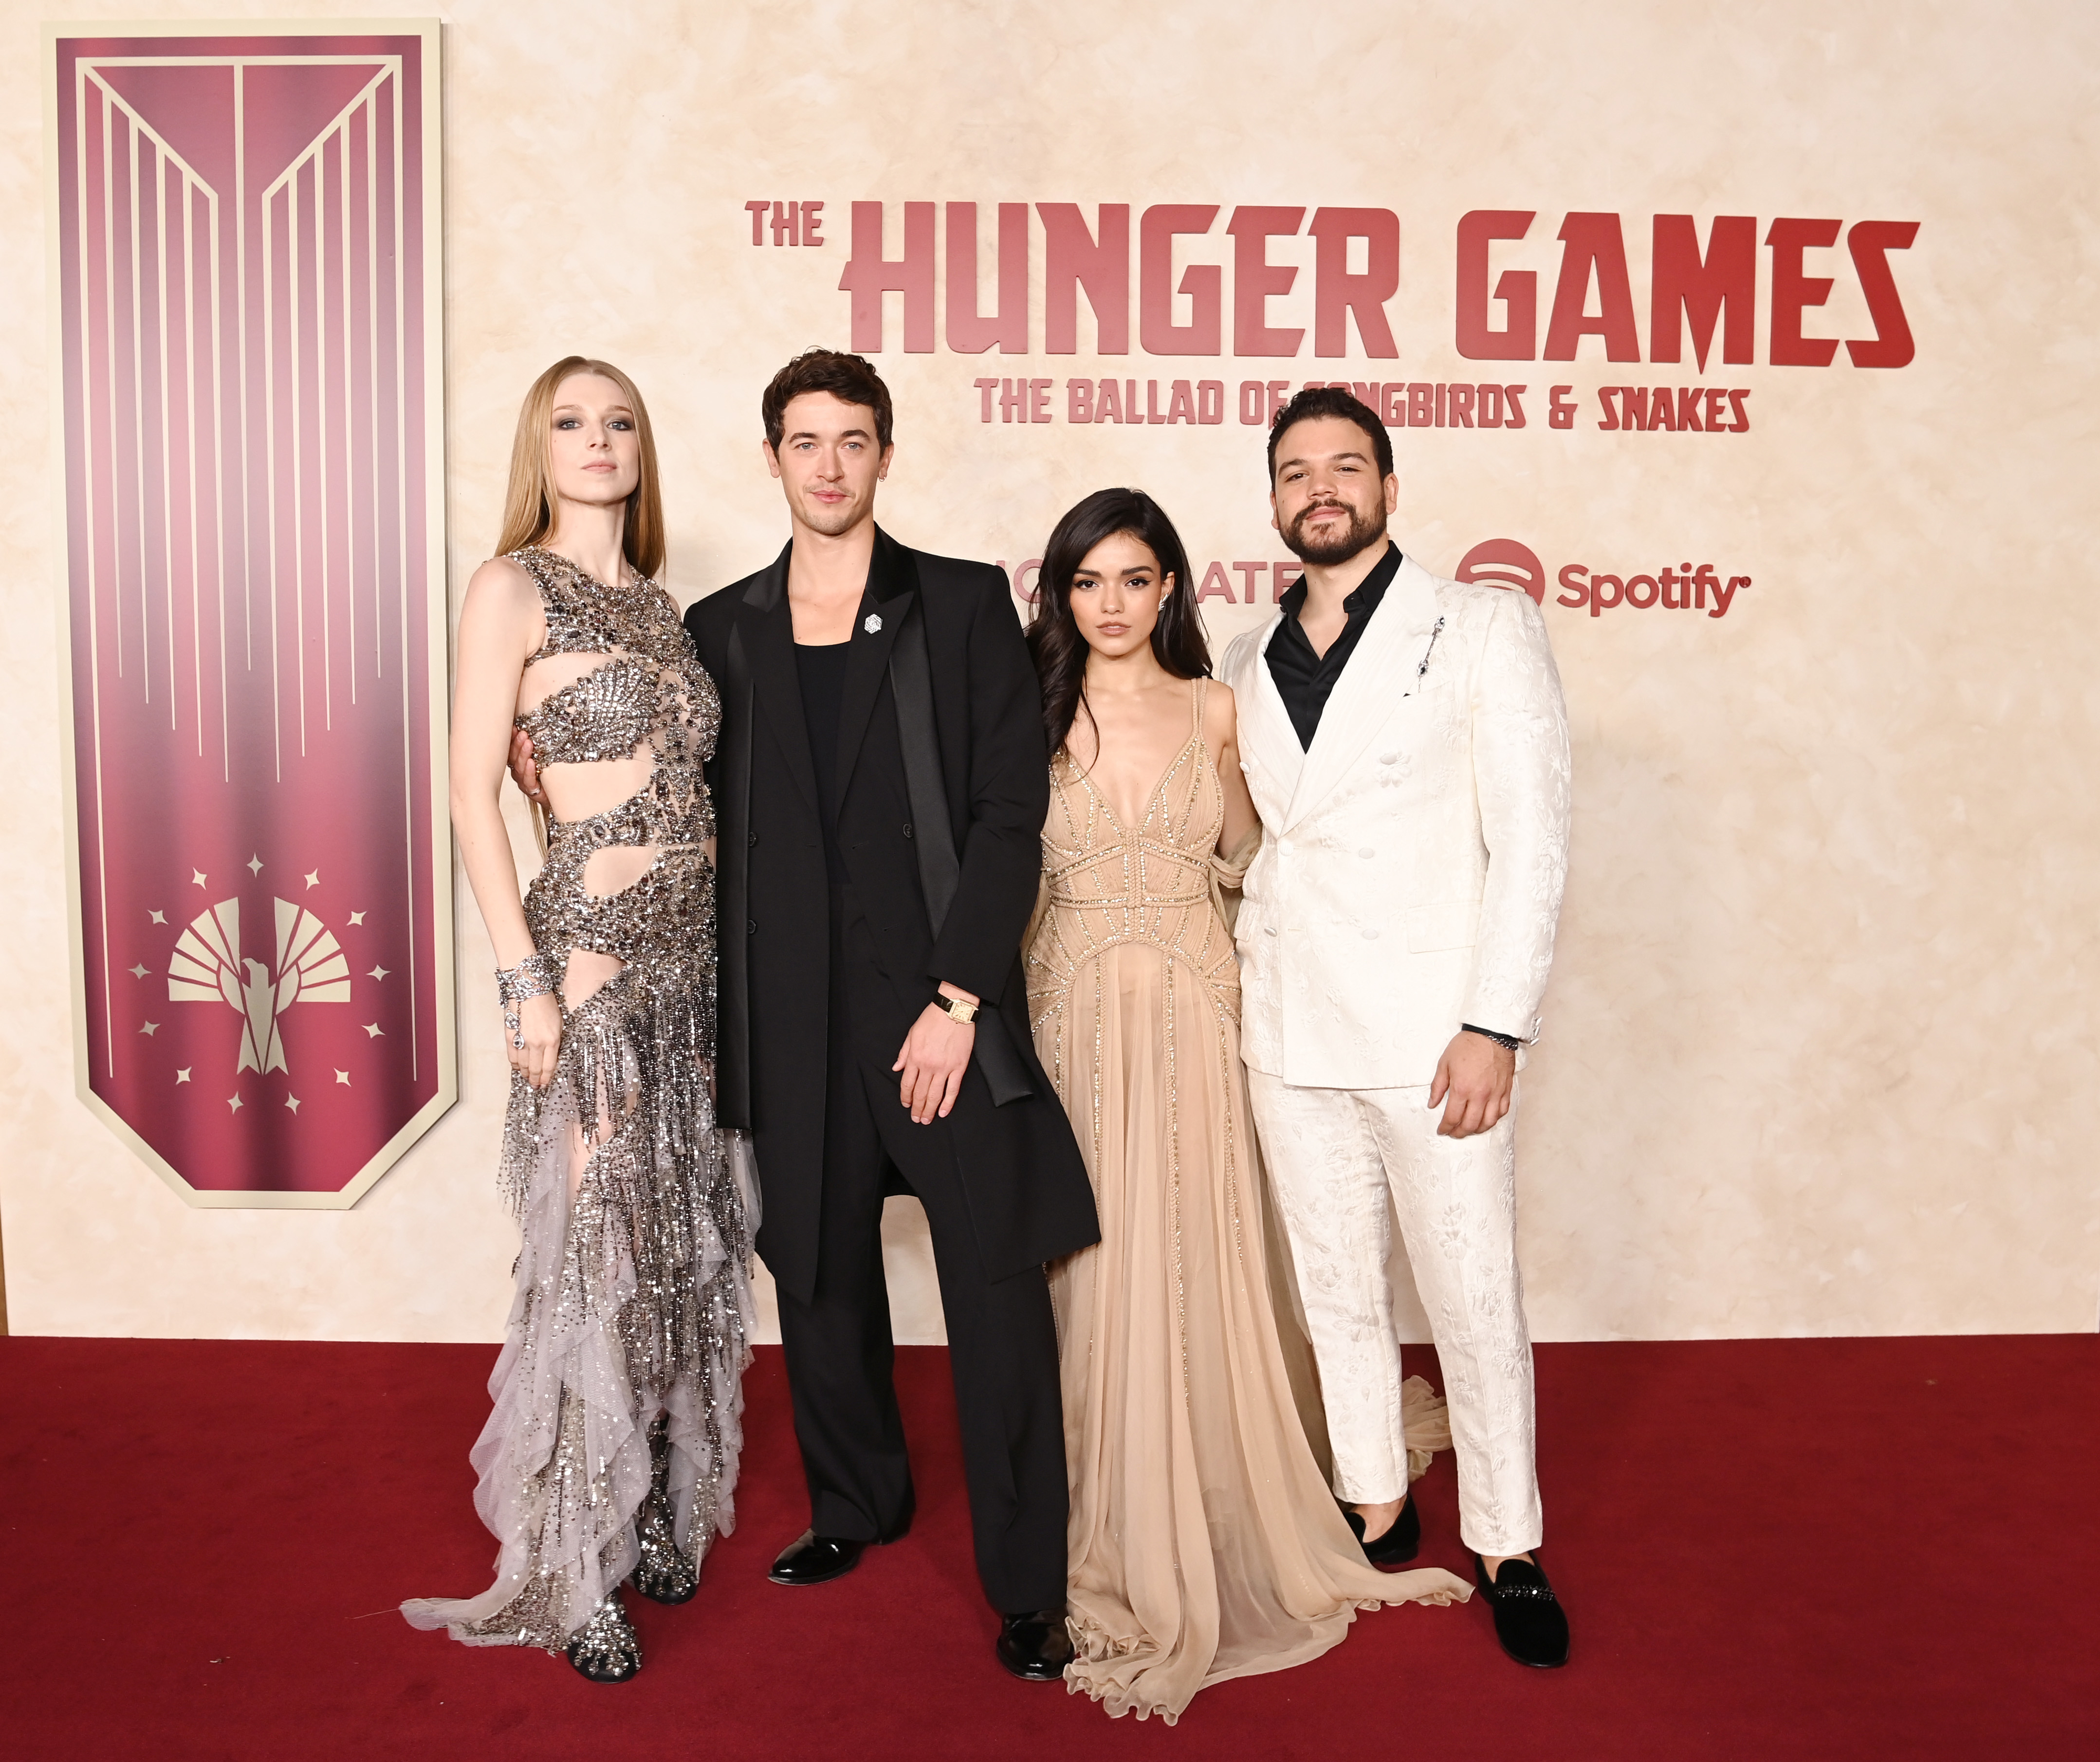 The cast of the Hunger Games film